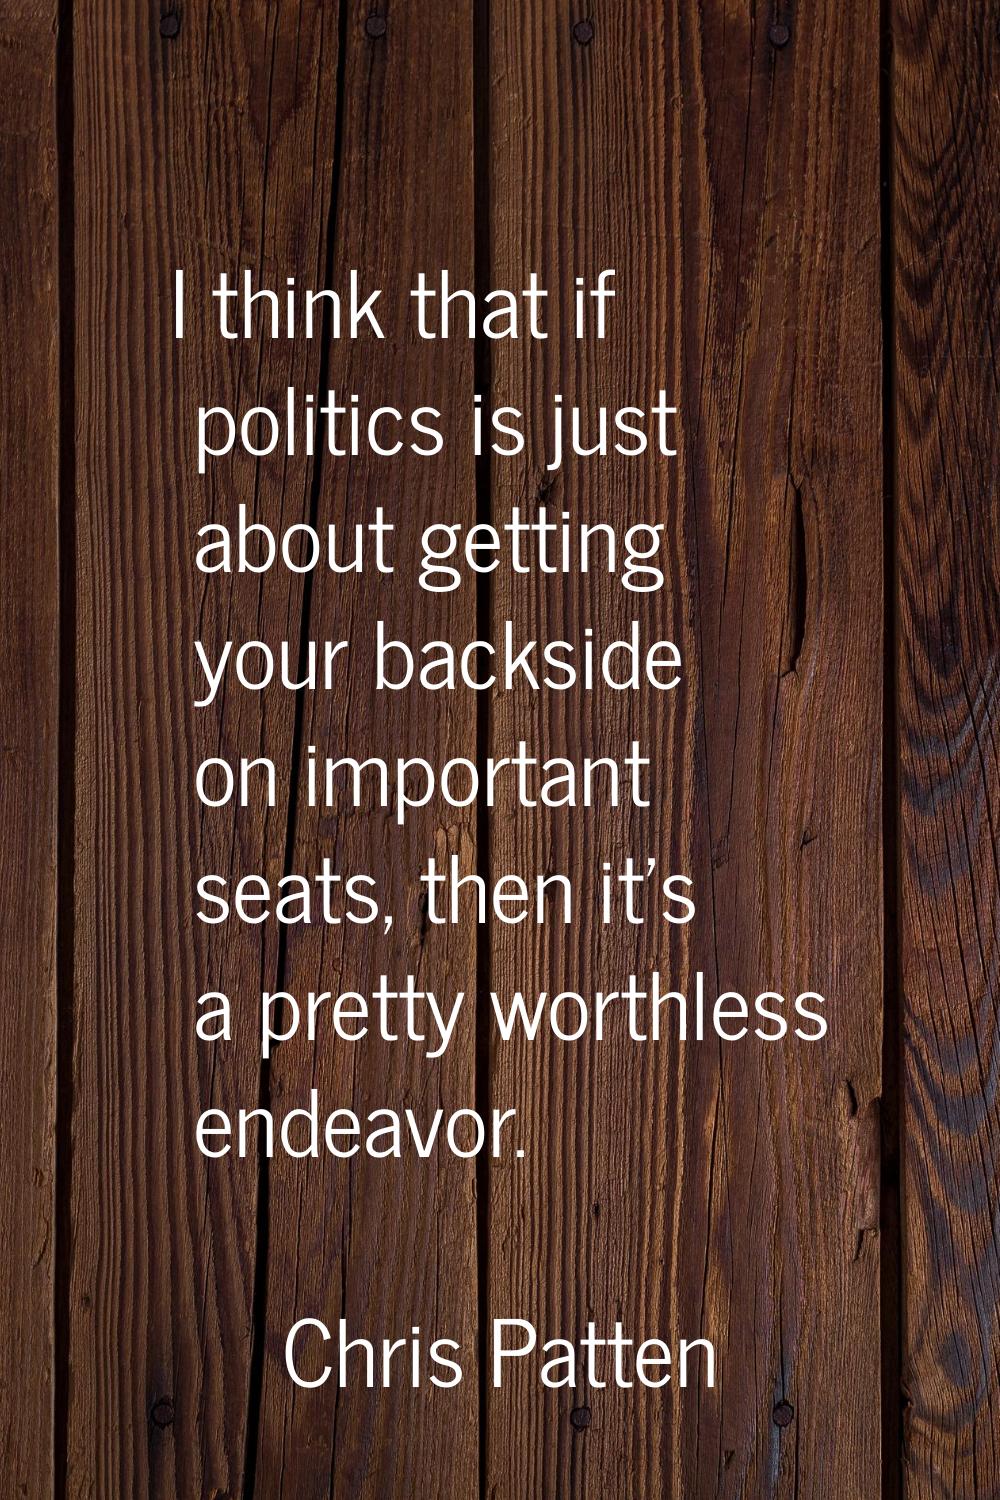 I think that if politics is just about getting your backside on important seats, then it's a pretty